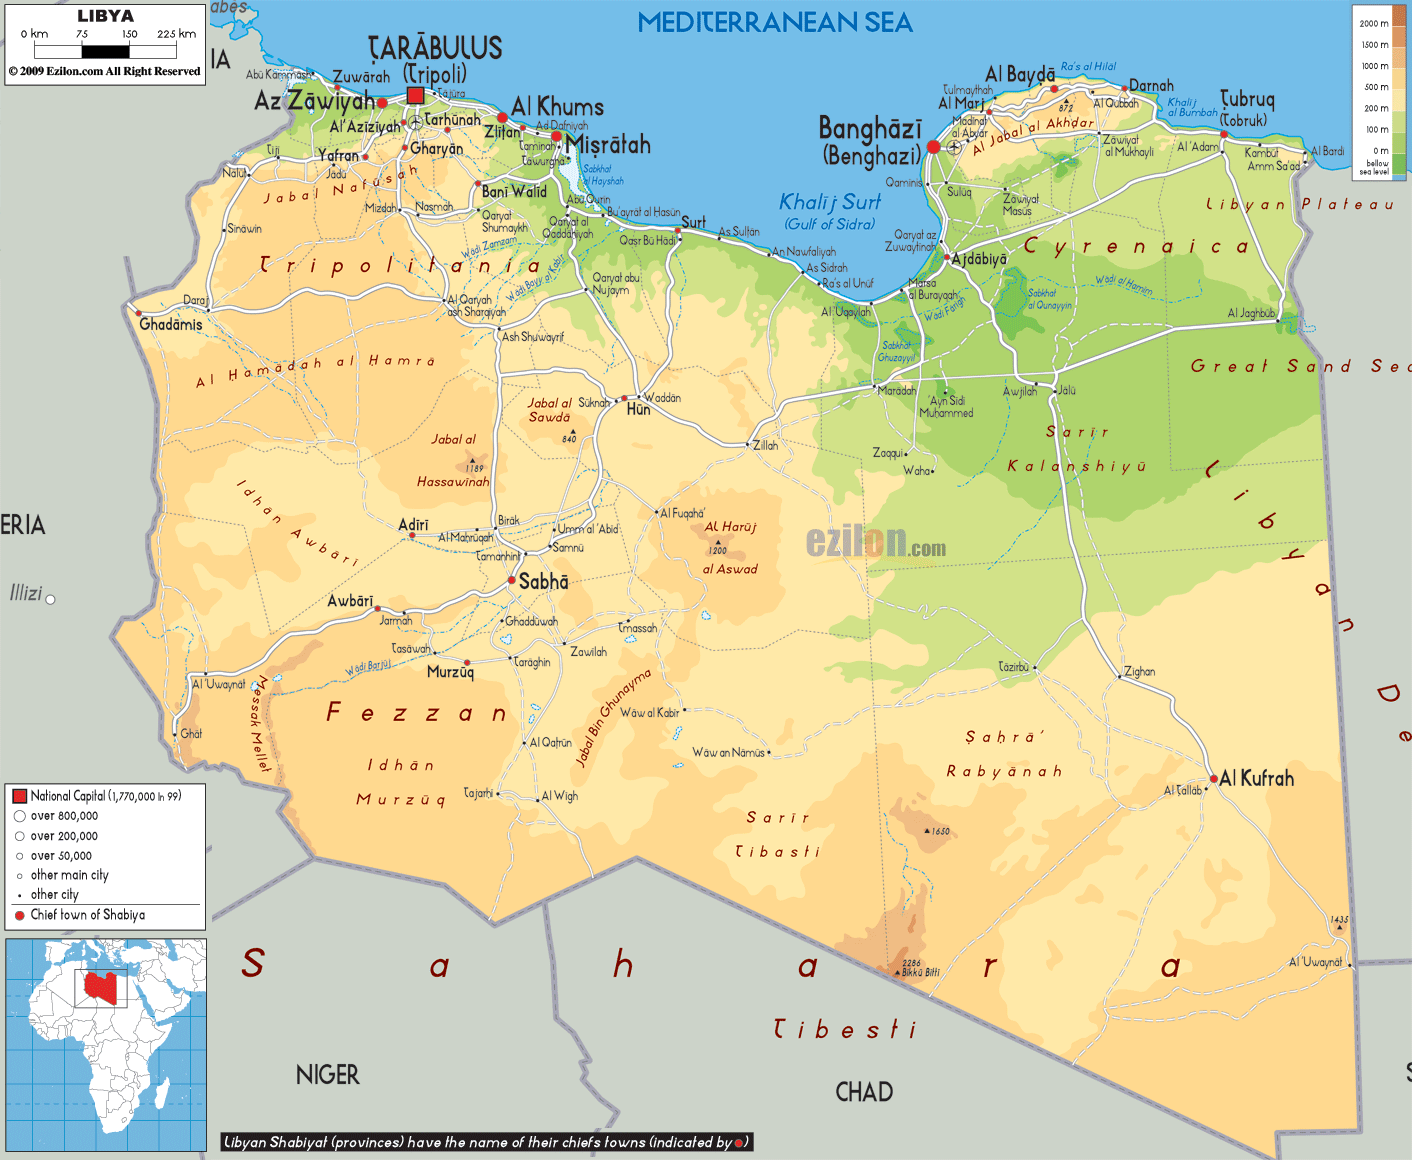 http://africaanswerman.com/wp-content/uploads/2011/03/Libya-physical-map2.gif